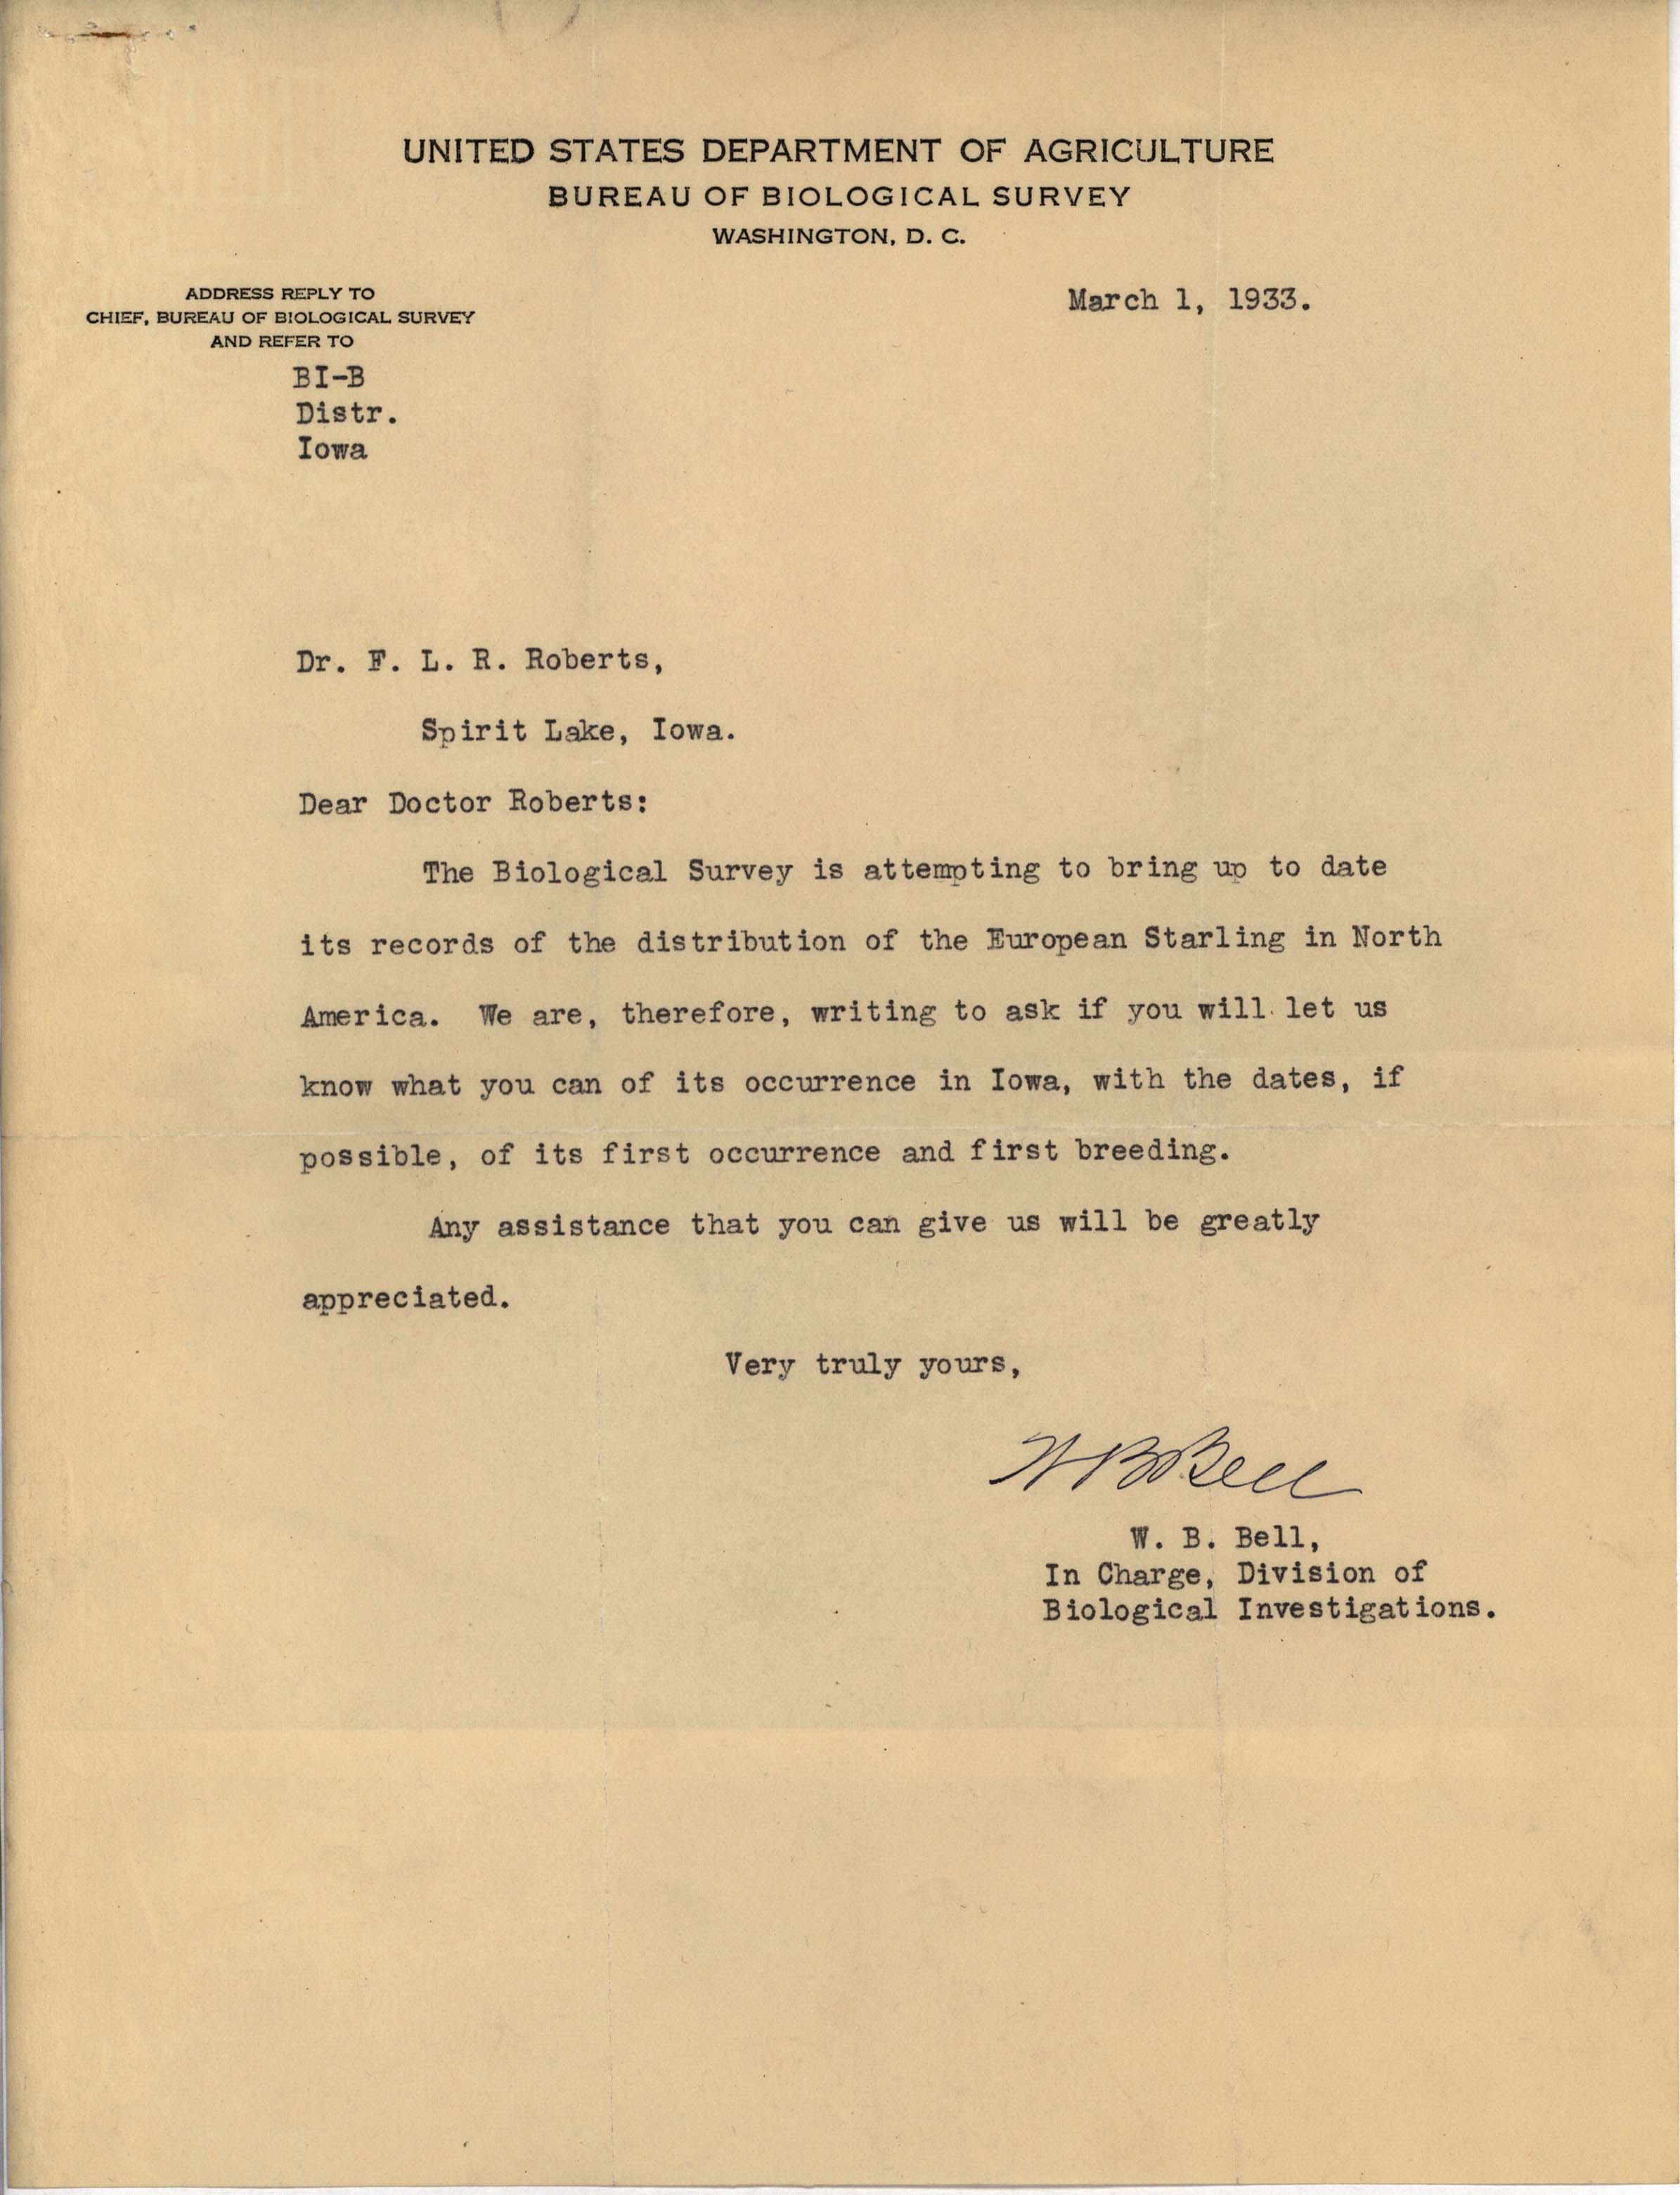 William Bell letter to Francis Roberts regarding European Starling, March 1, 1933